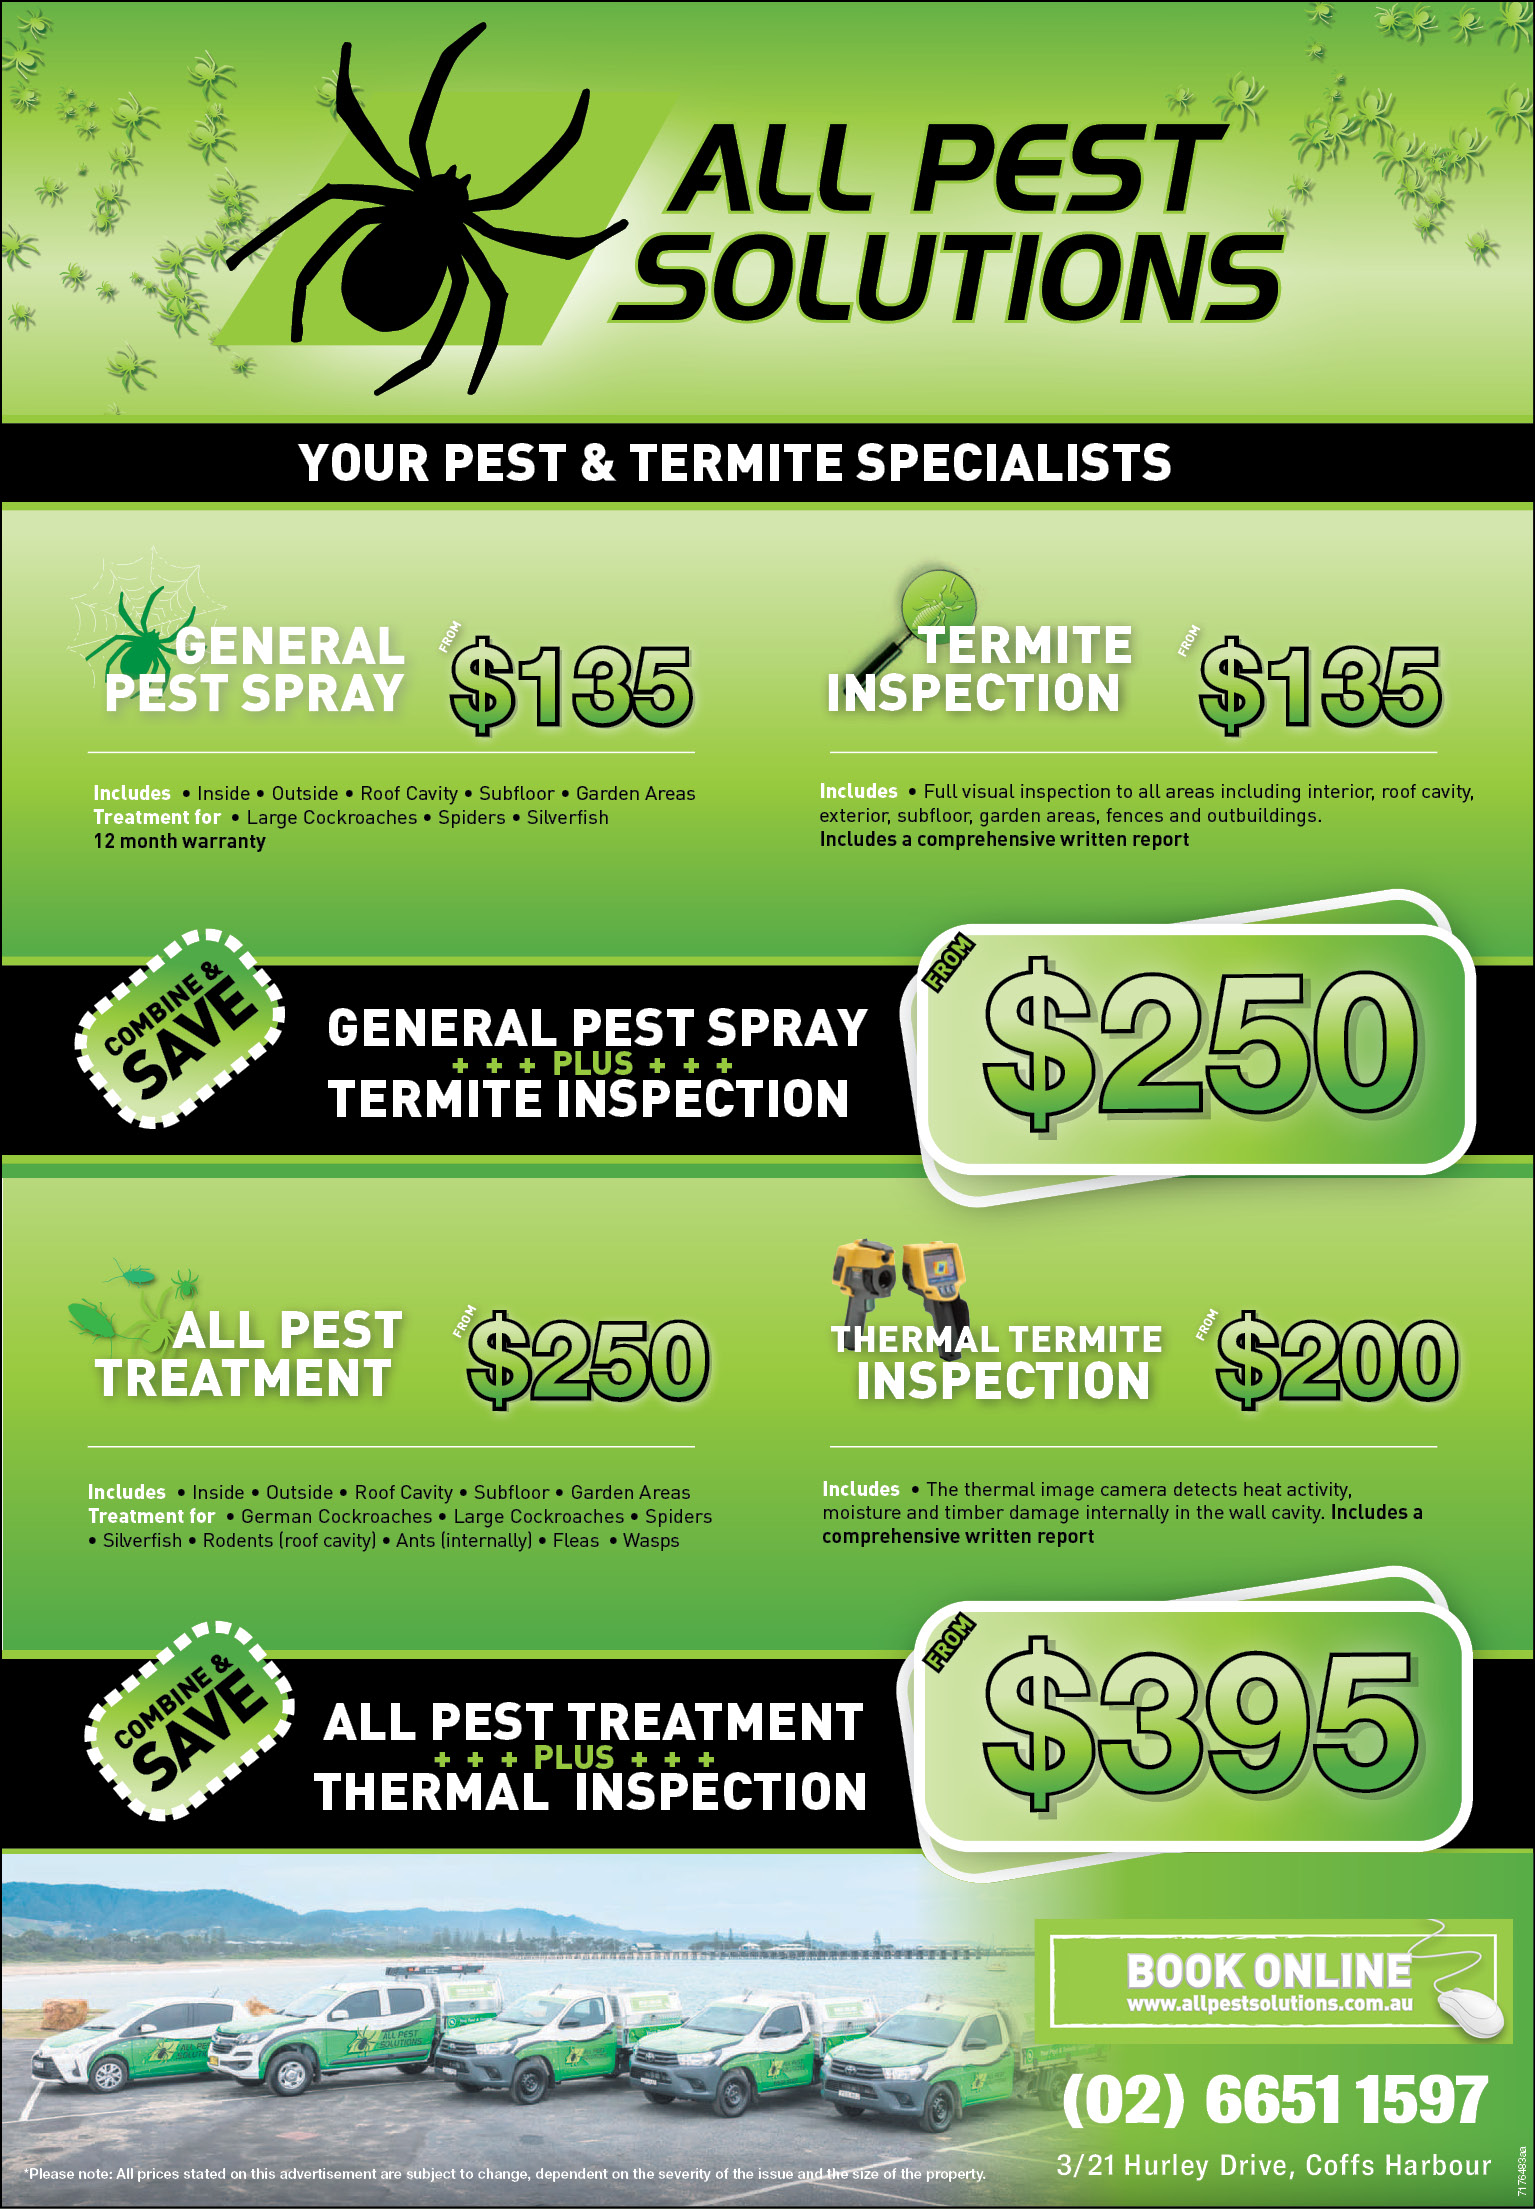 All pest control solutions